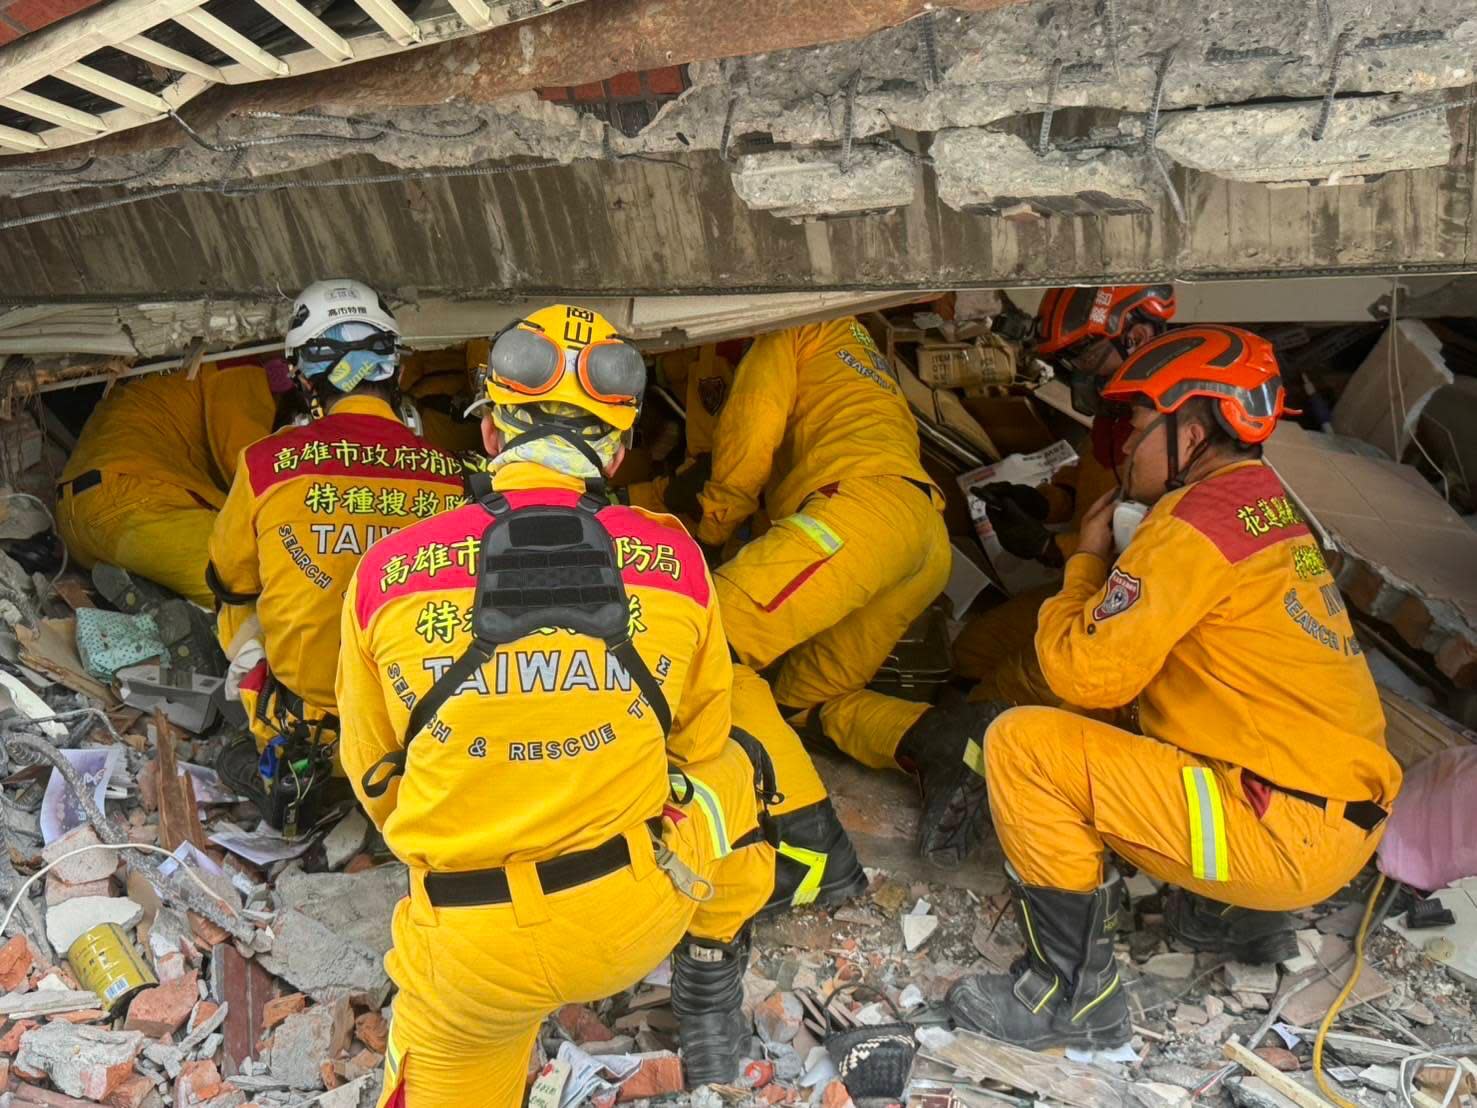 Rescue workers search for survivors under a collapsed building in Hualien City.